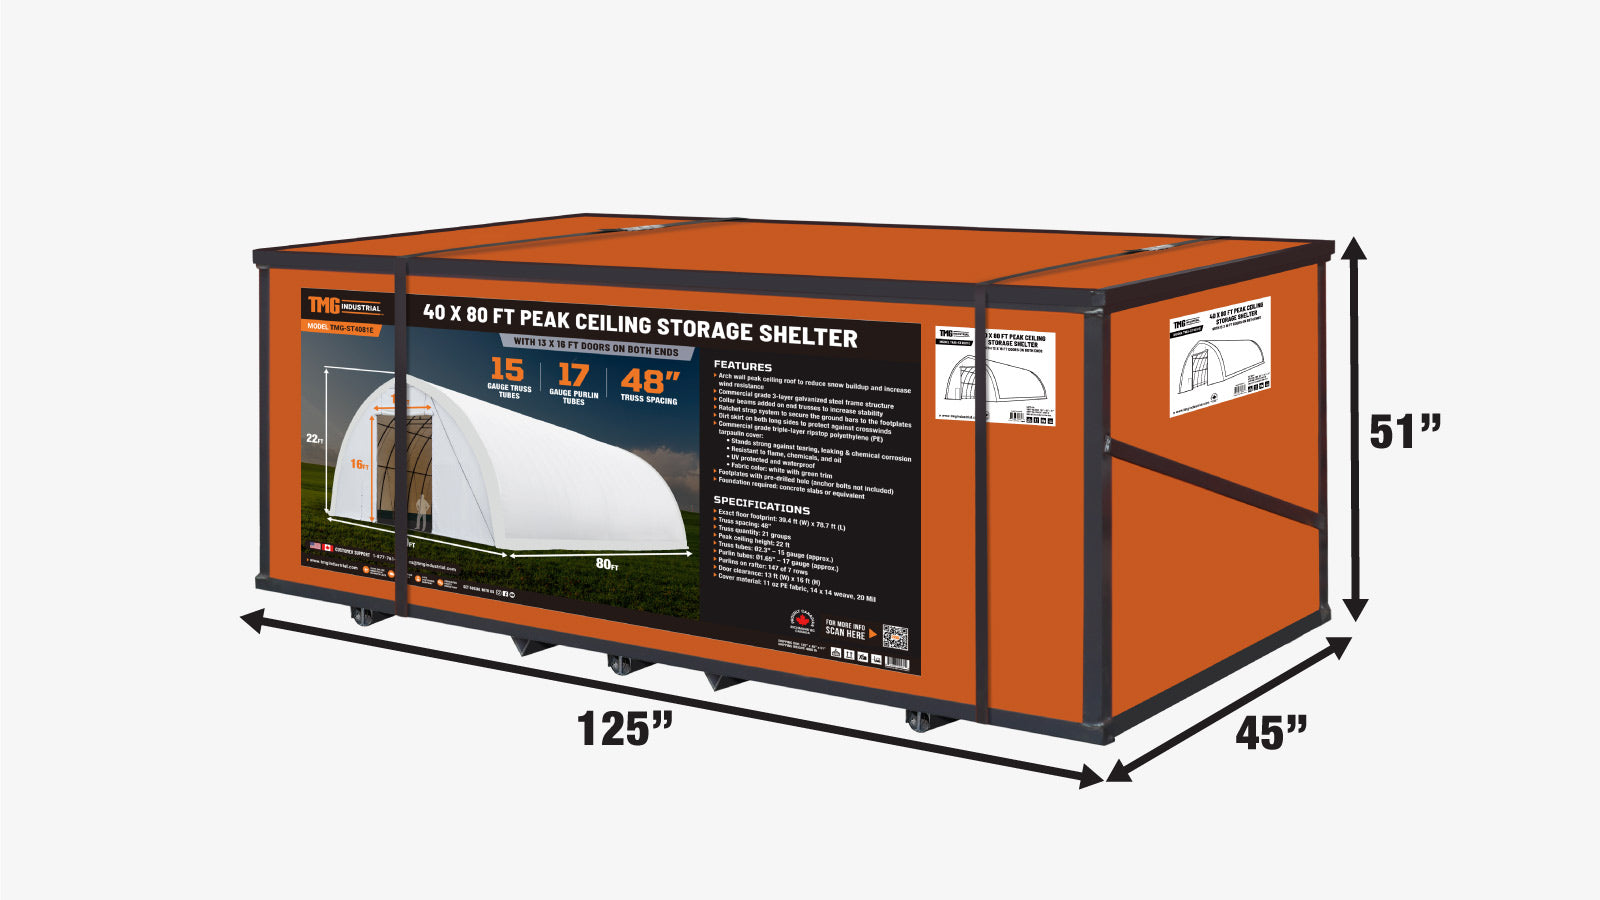 TMG-ST4081E 40' x 80' Peak Ceiling Storage Shelter, Single Truss, 11oz PE Cover, 13' W x 16' H Wide Open Door on Two End Walls-shipping-info-image